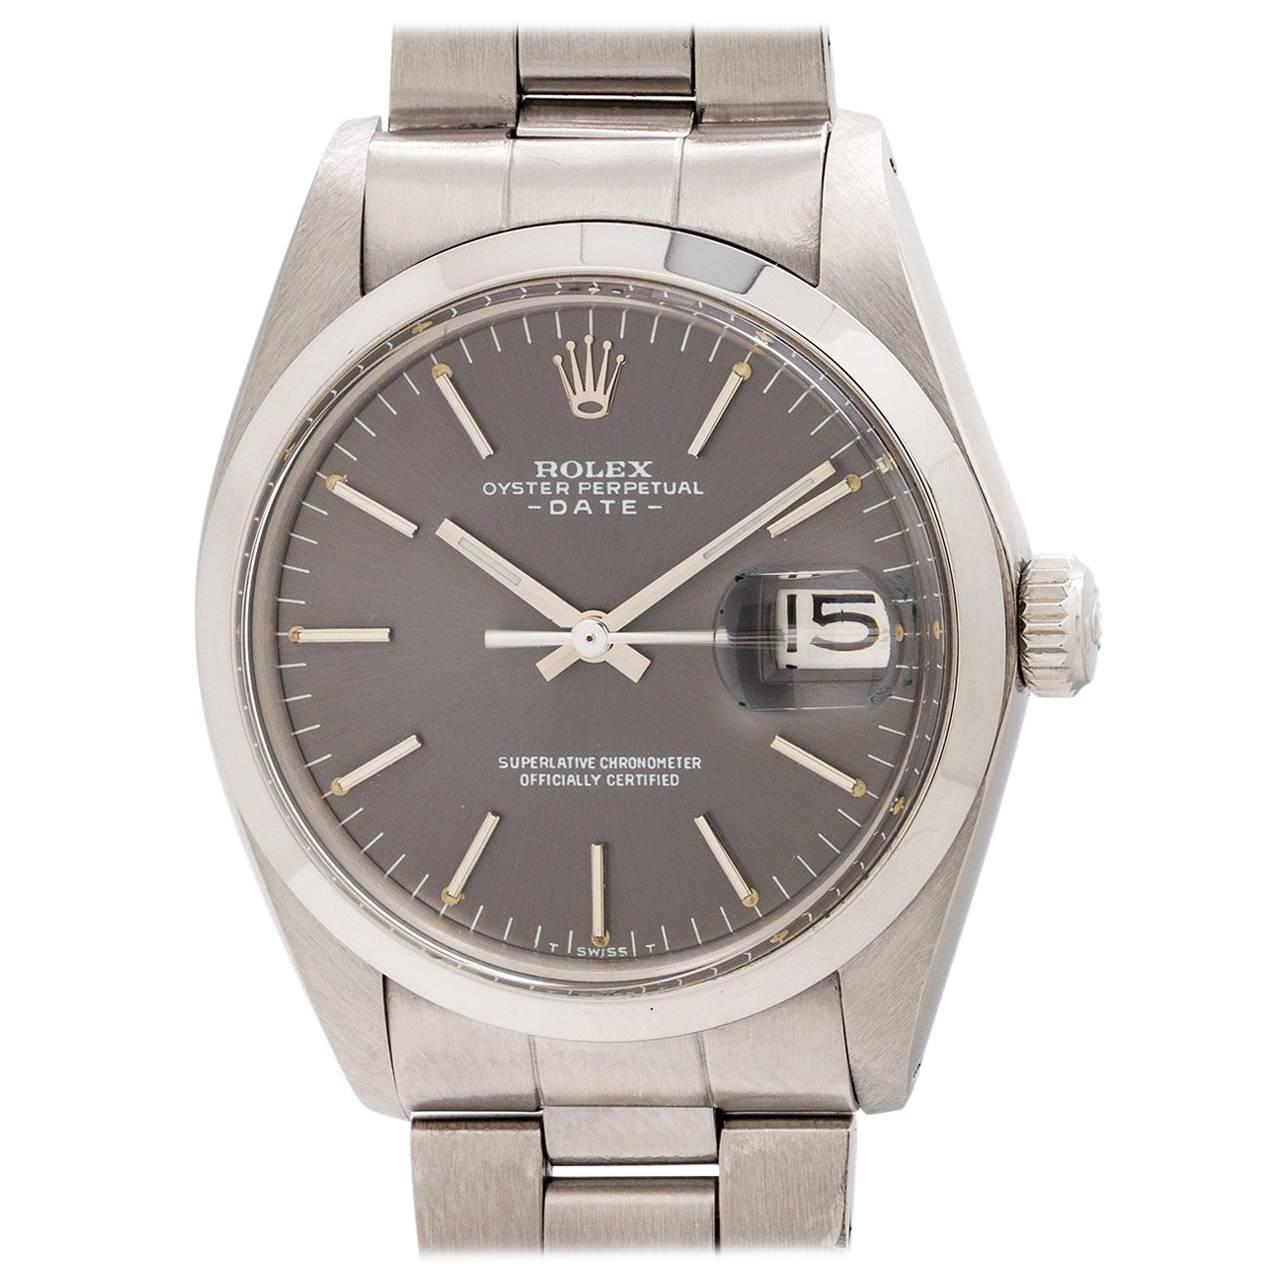 Rolex Oyster Perpetual Date Ref 1500 Gray Dial, circa 1970 For Sale